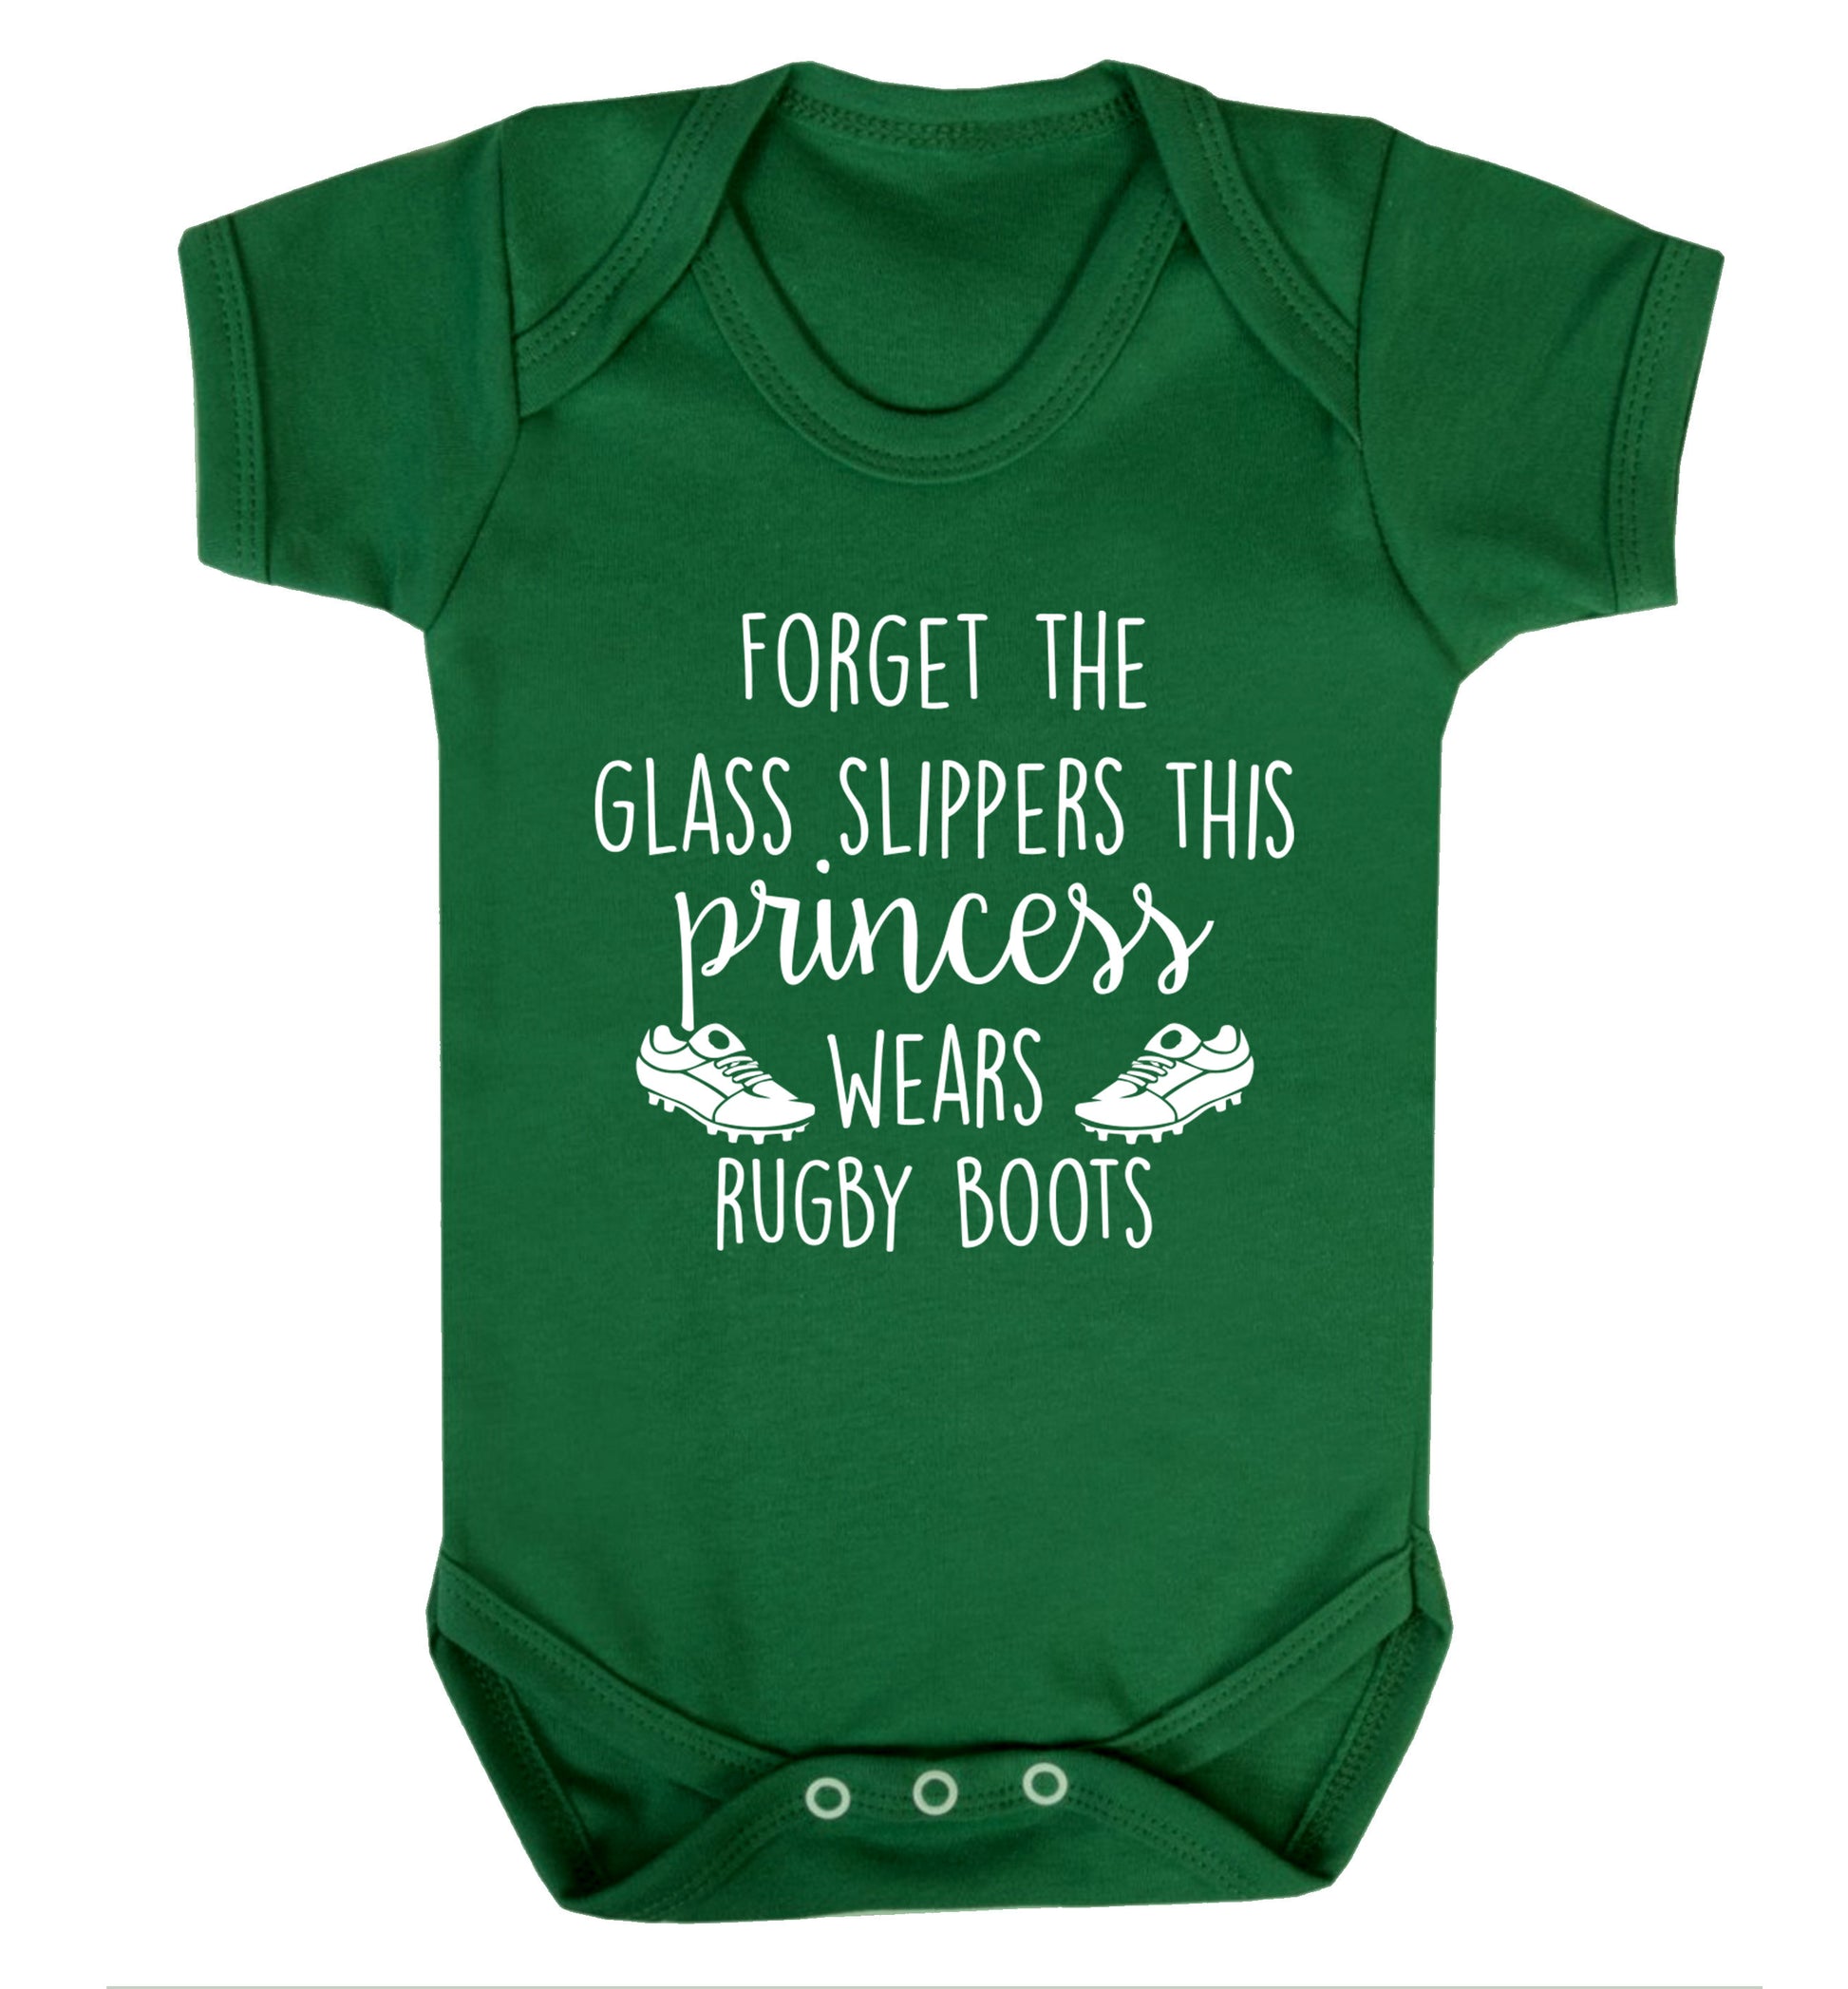 Forget the glass slippers this princess wears rugby boots Baby Vest green 18-24 months